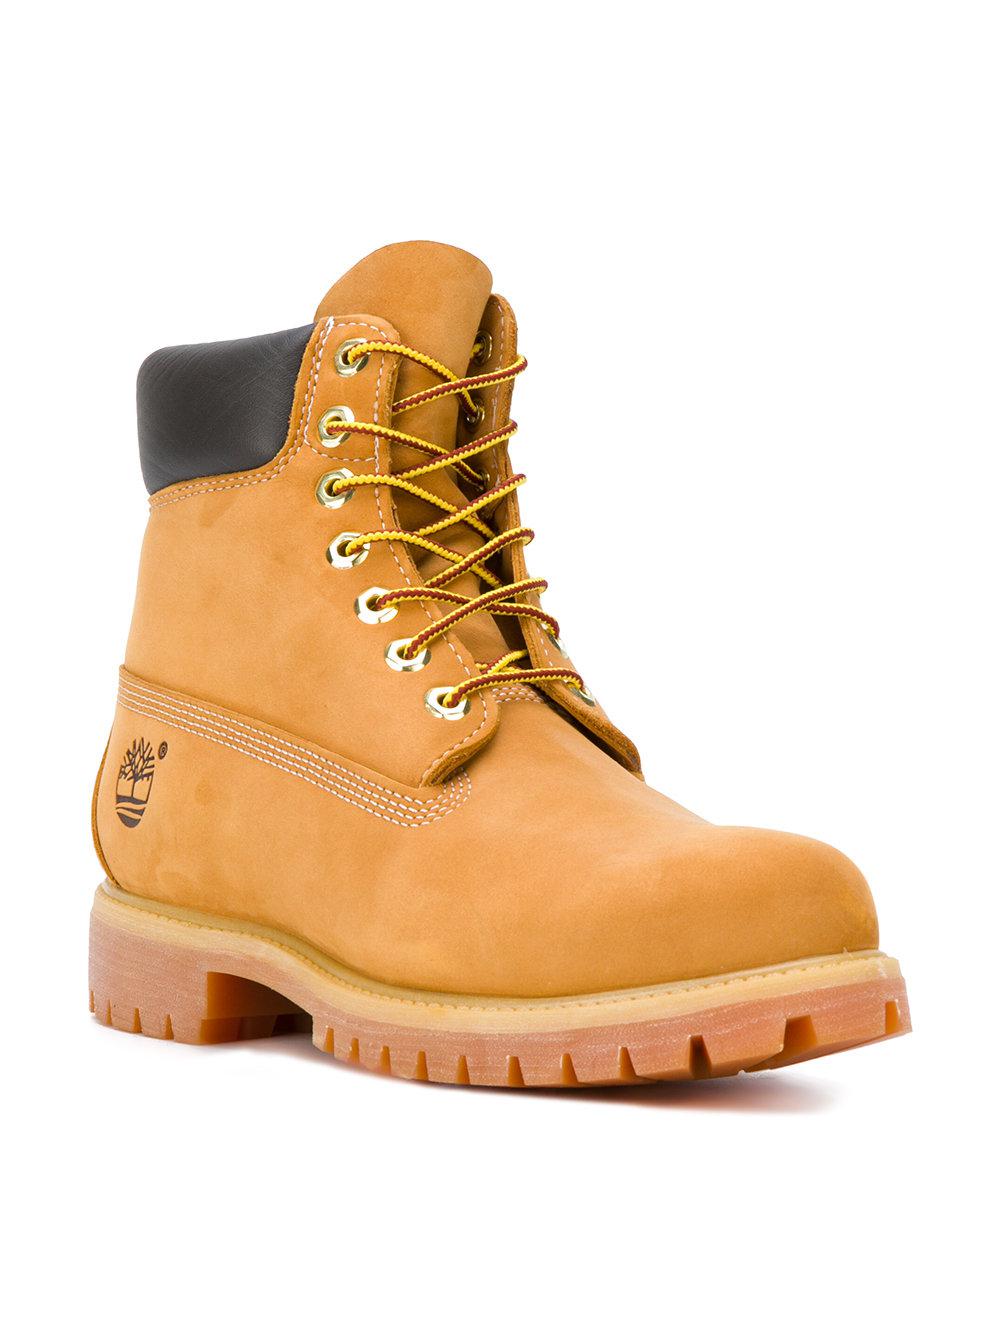 Timberland Rubber Premium Ankle Boots in Brown for Men - Lyst